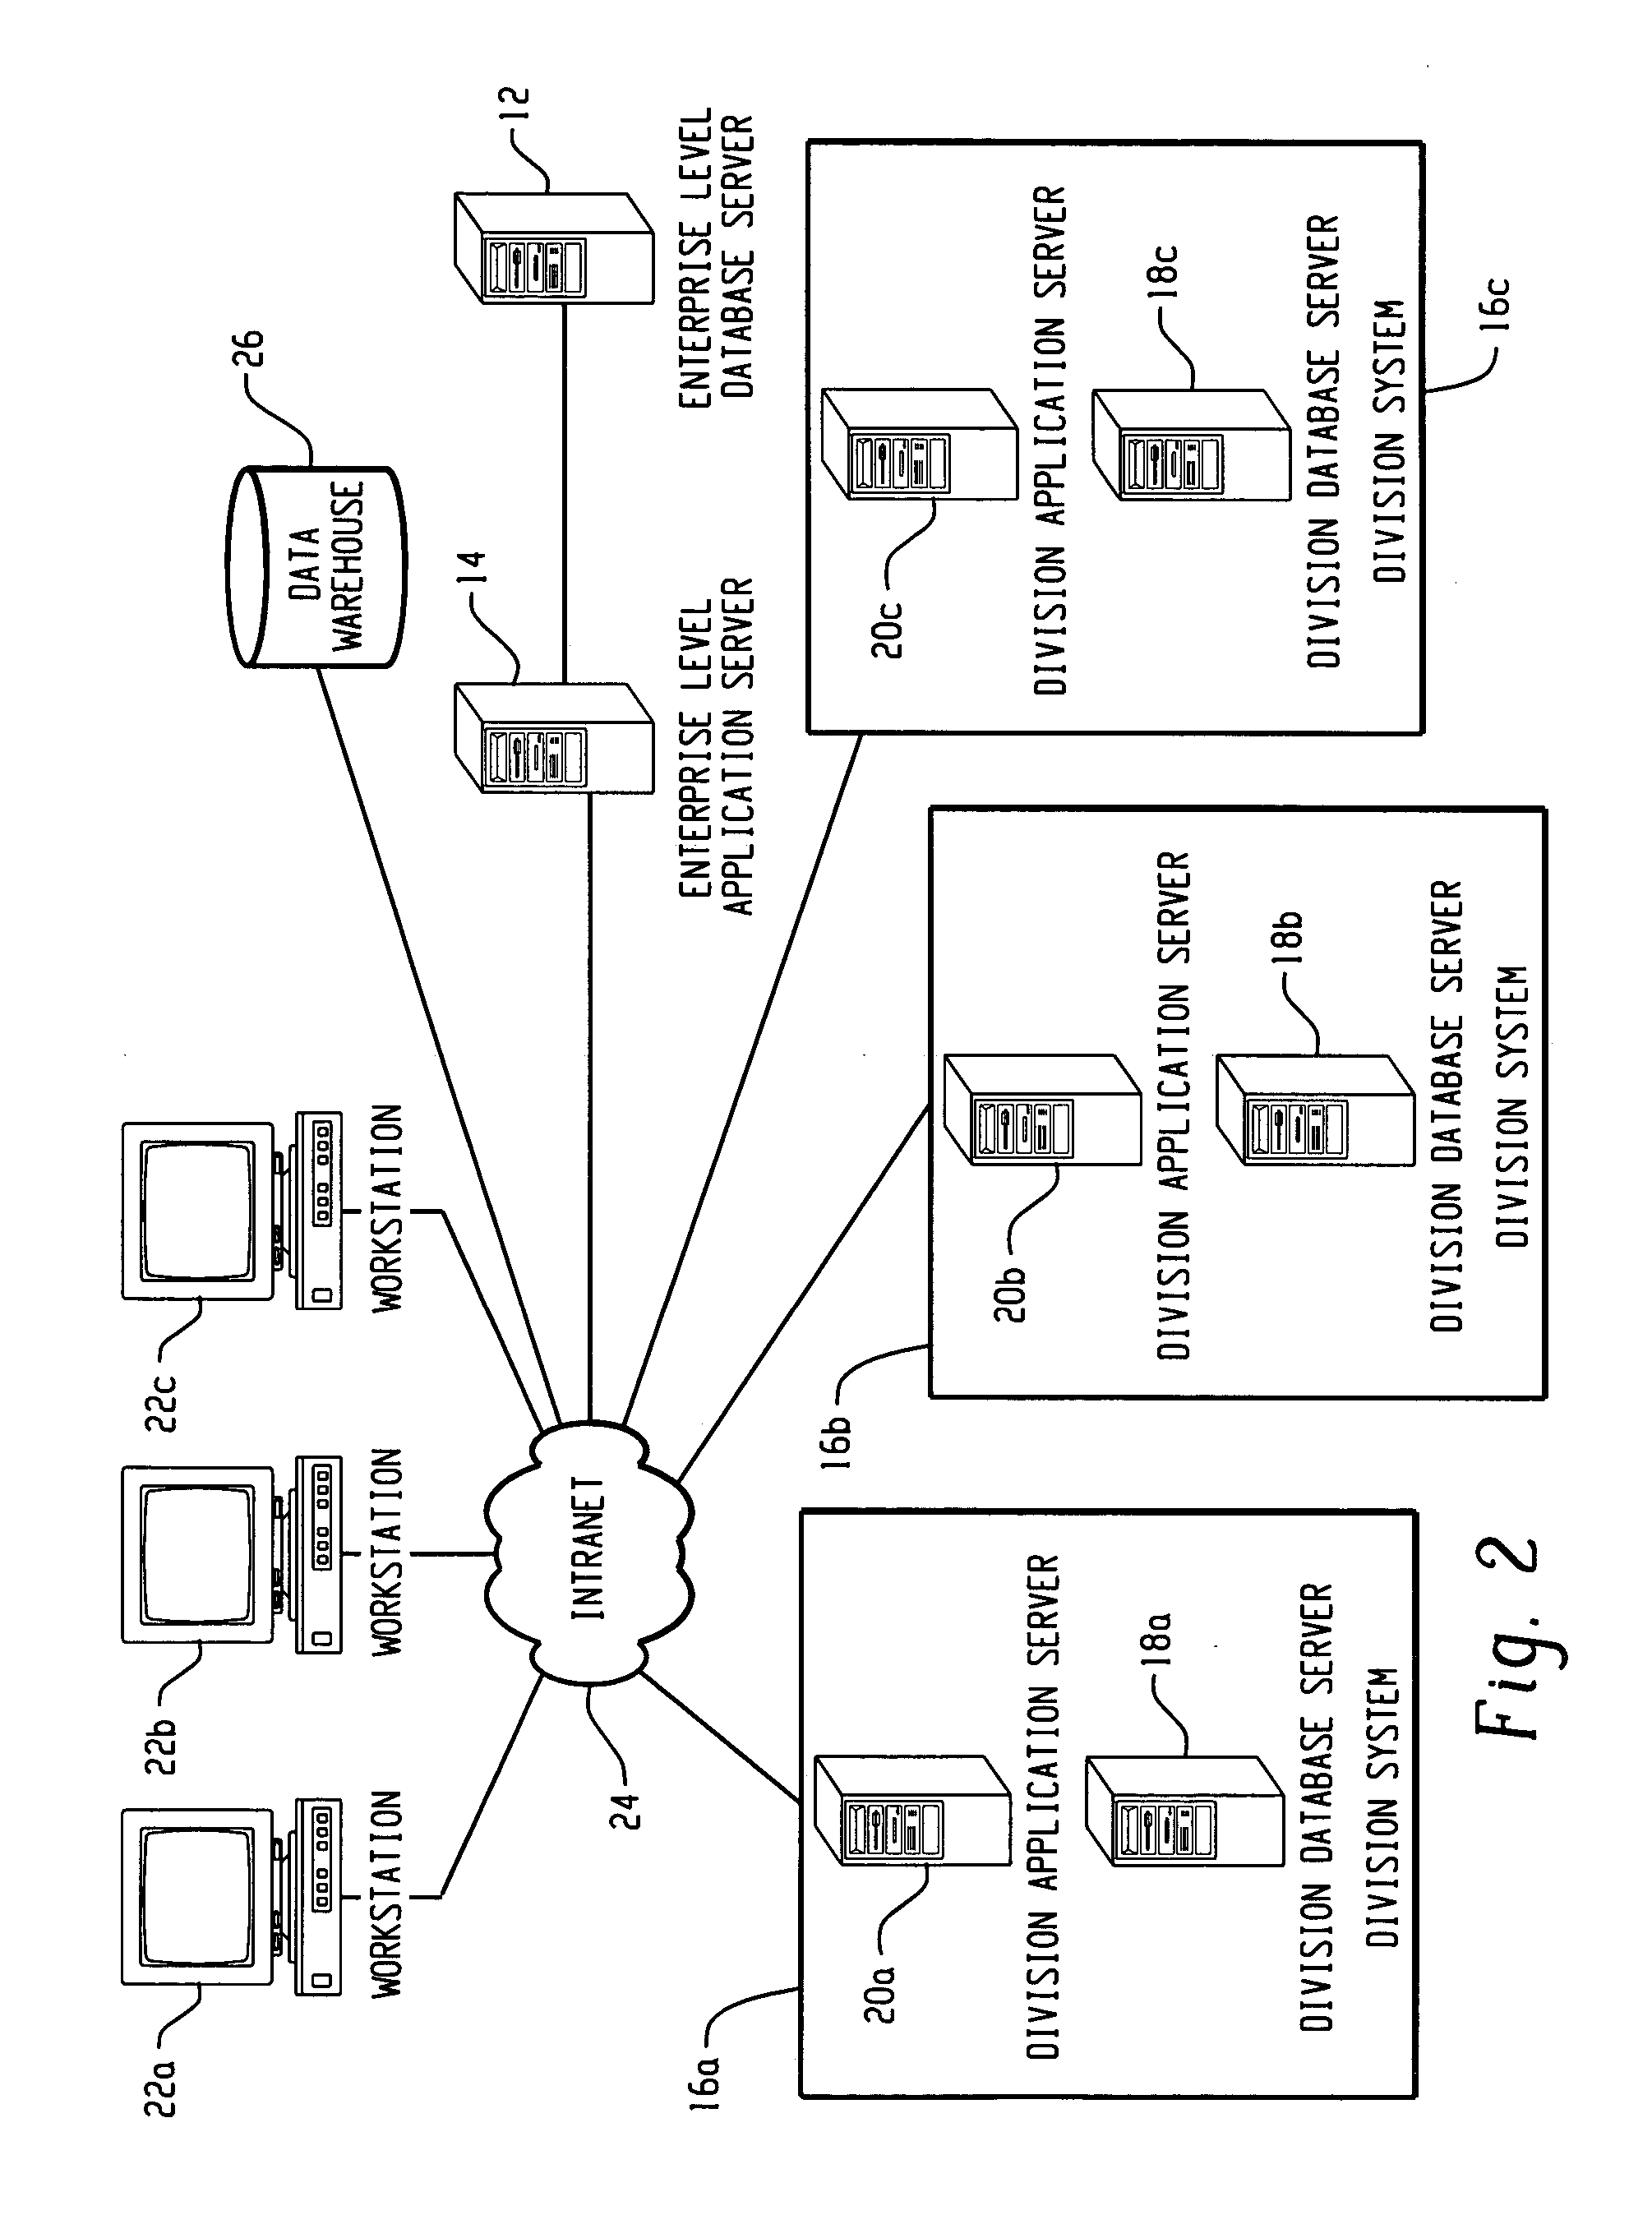 System and method for mapping of planograms